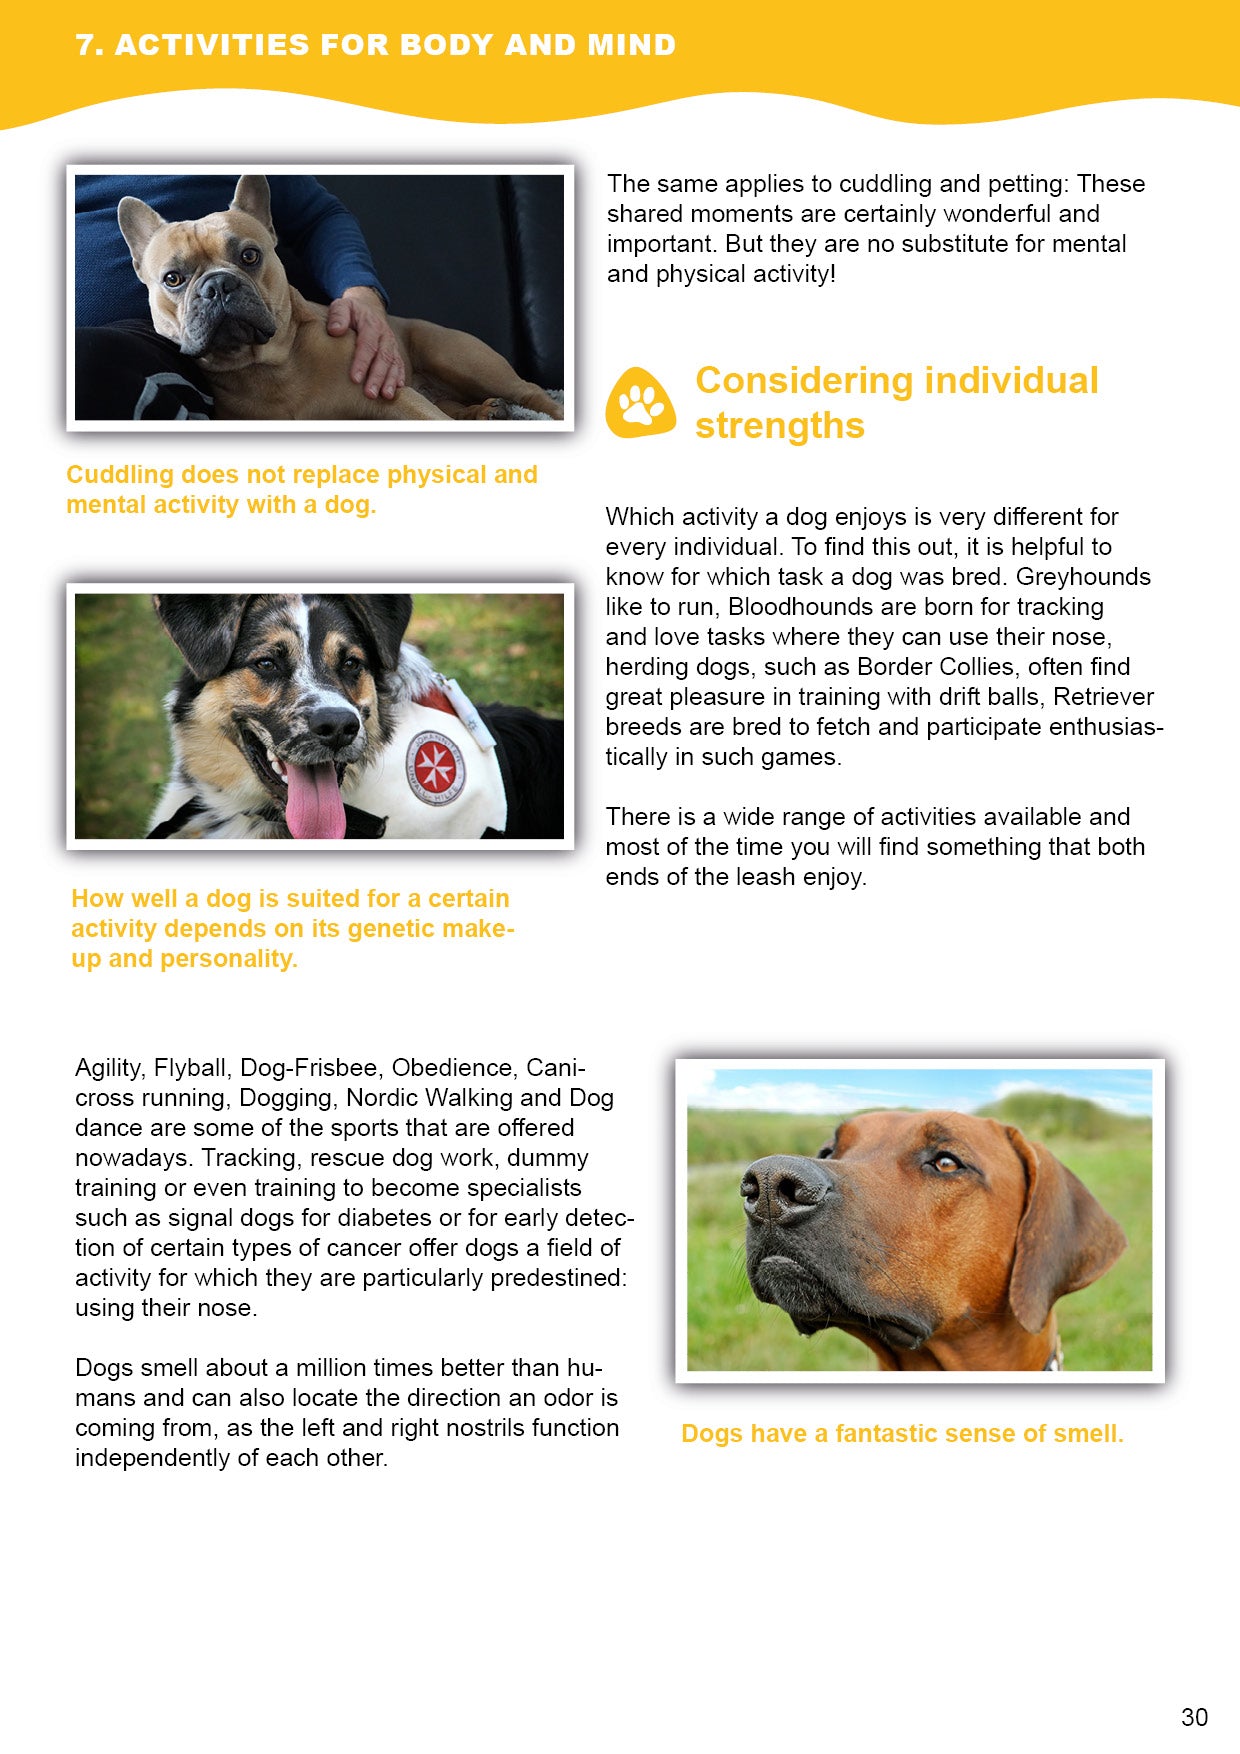 Doggy Guide Sample 2